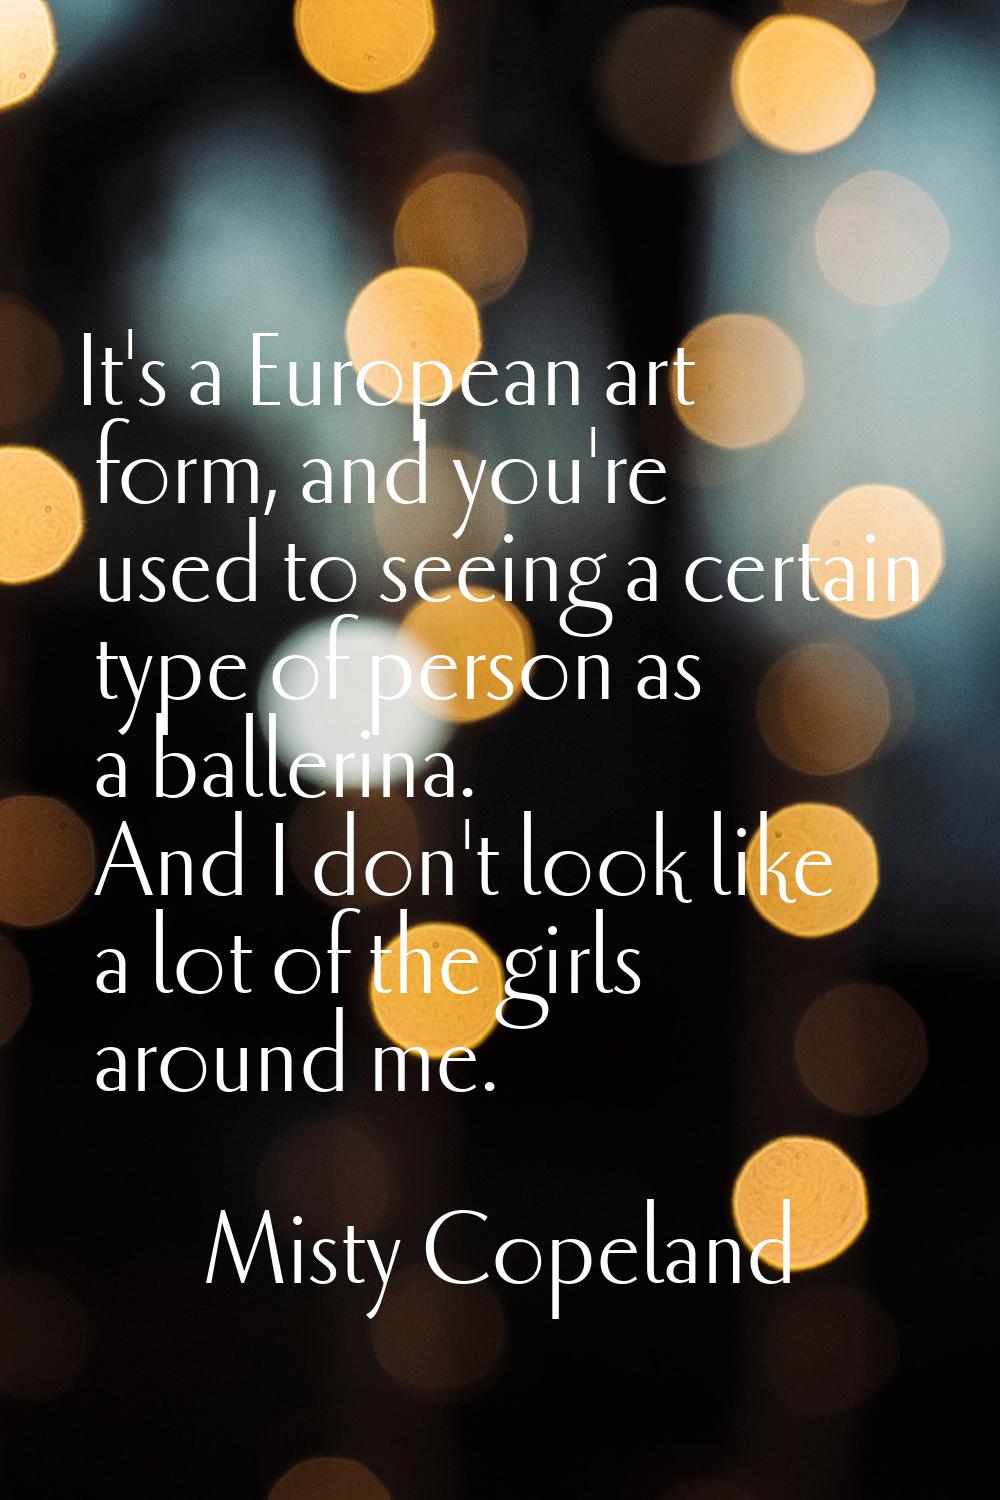 It's a European art form, and you're used to seeing a certain type of person as a ballerina. And I 